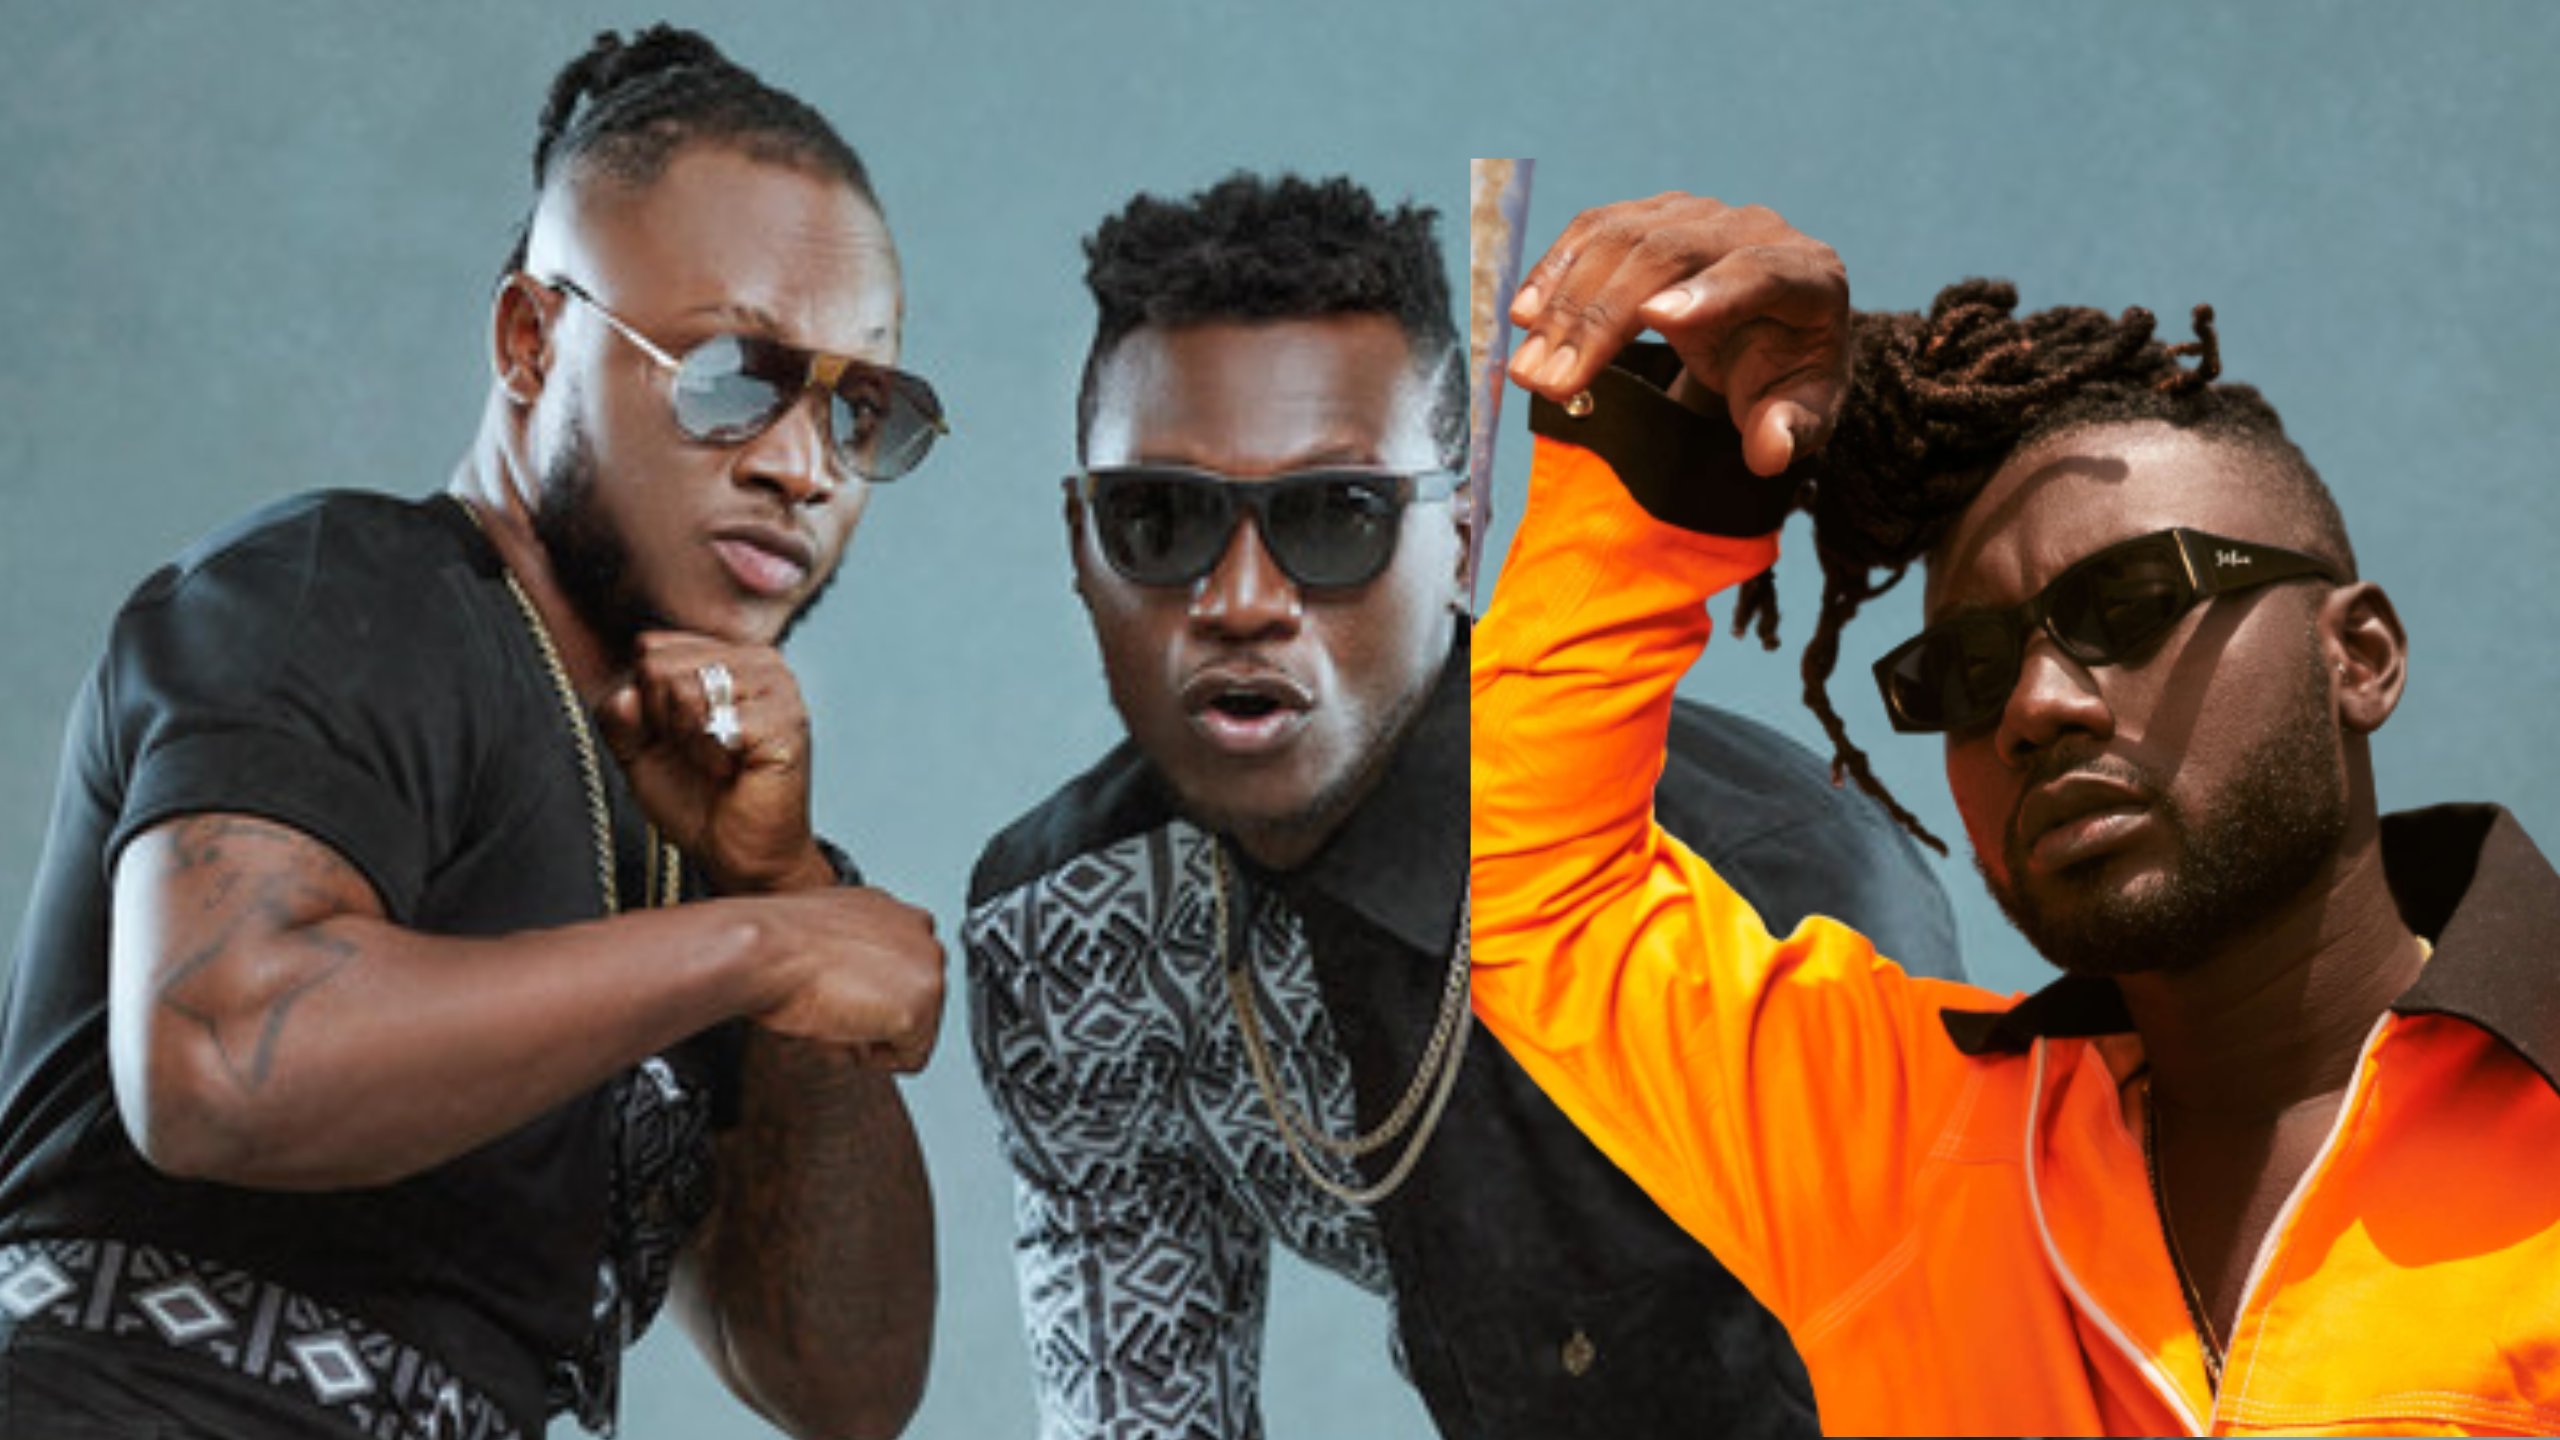 Keche Threatens to Slap Pappy Kojo, Igniting an Intense Feud in the Music Scene